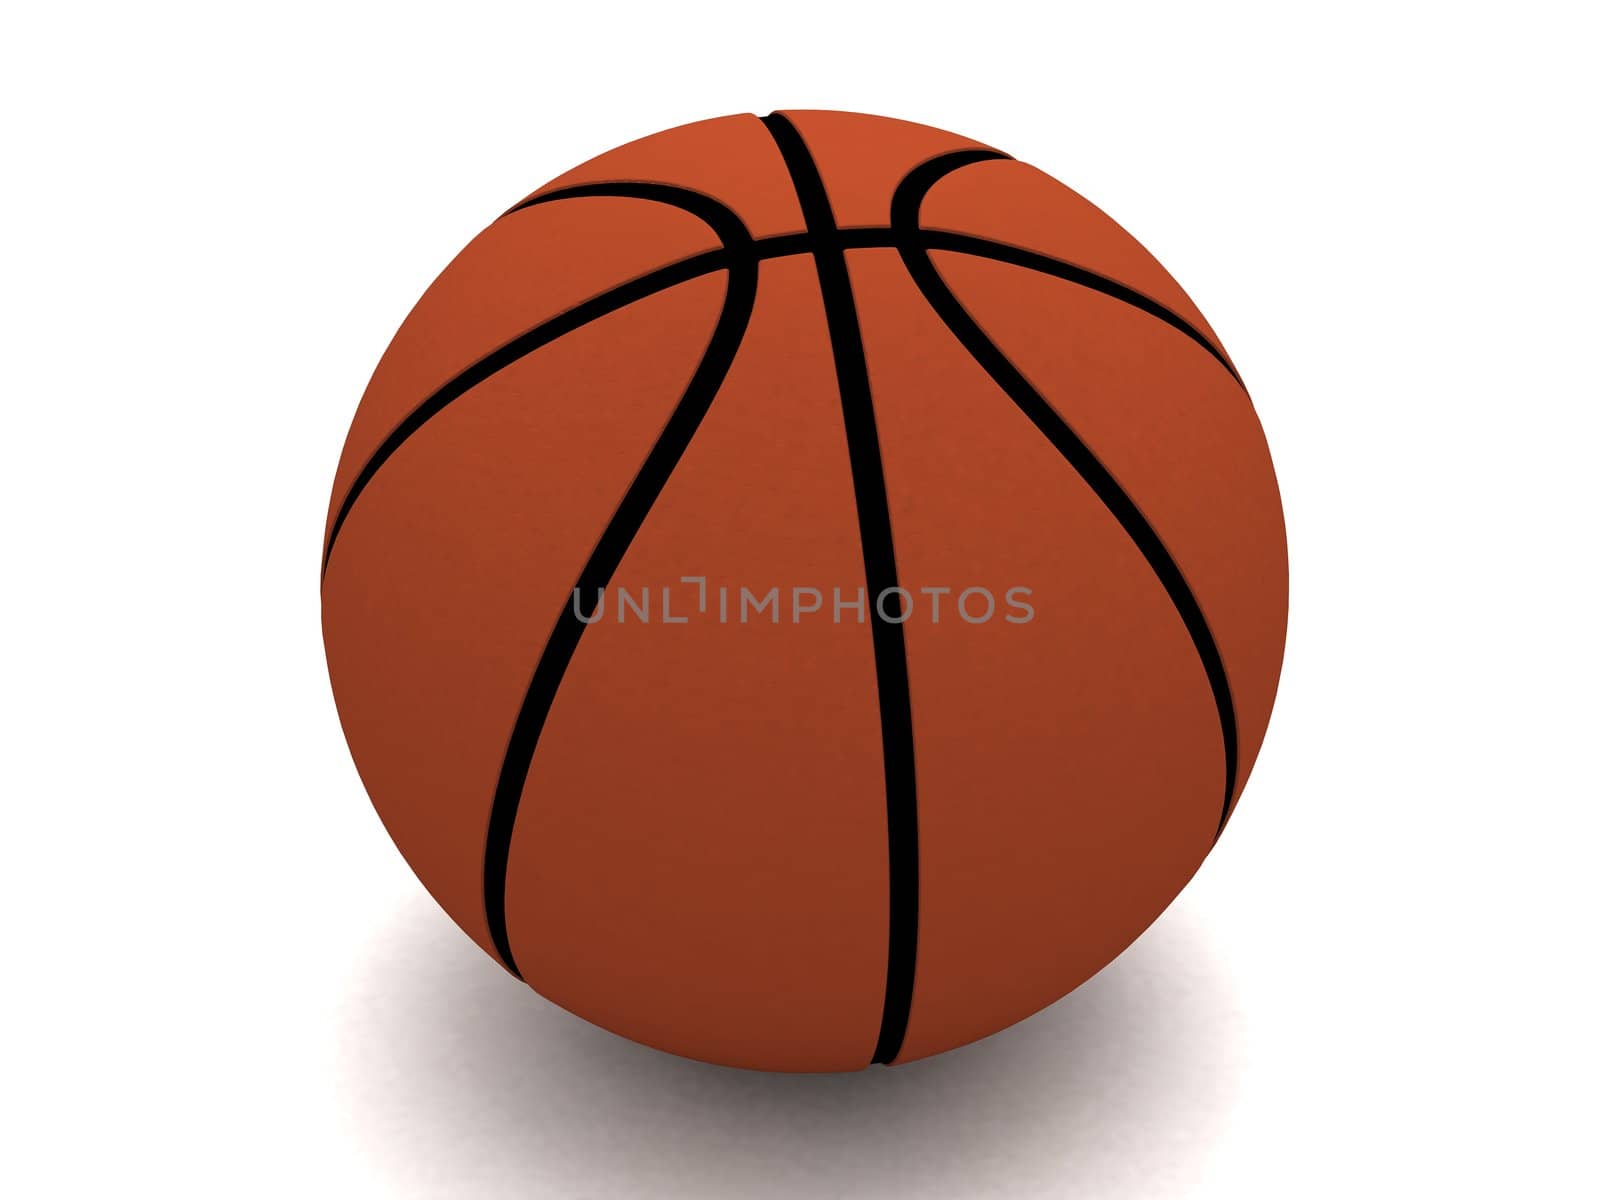 three dimensional view of basket ball


